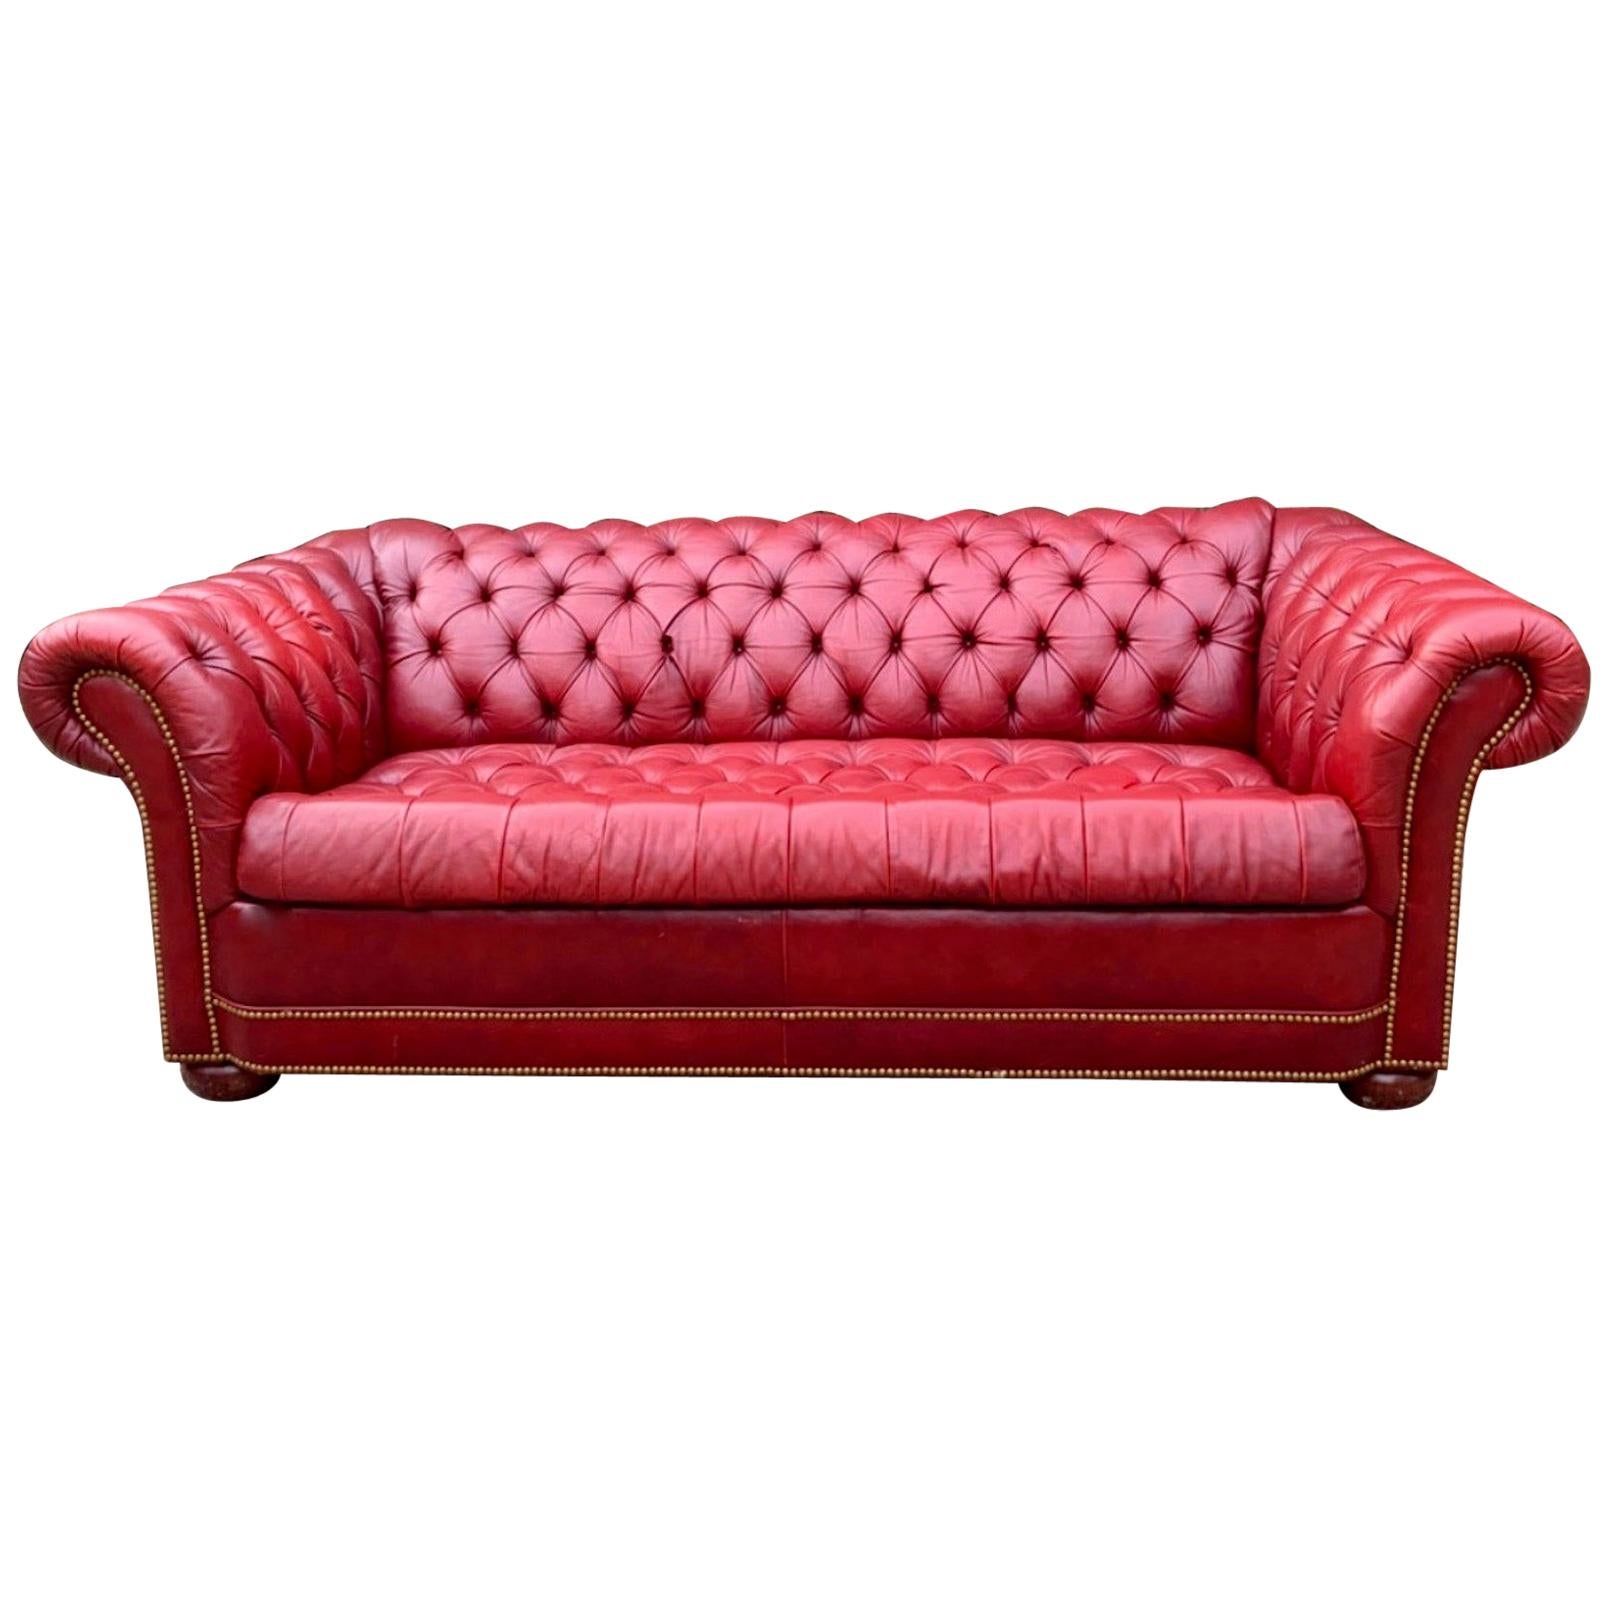 Red Leather Tufted Chesterfield Sleeper Sofa